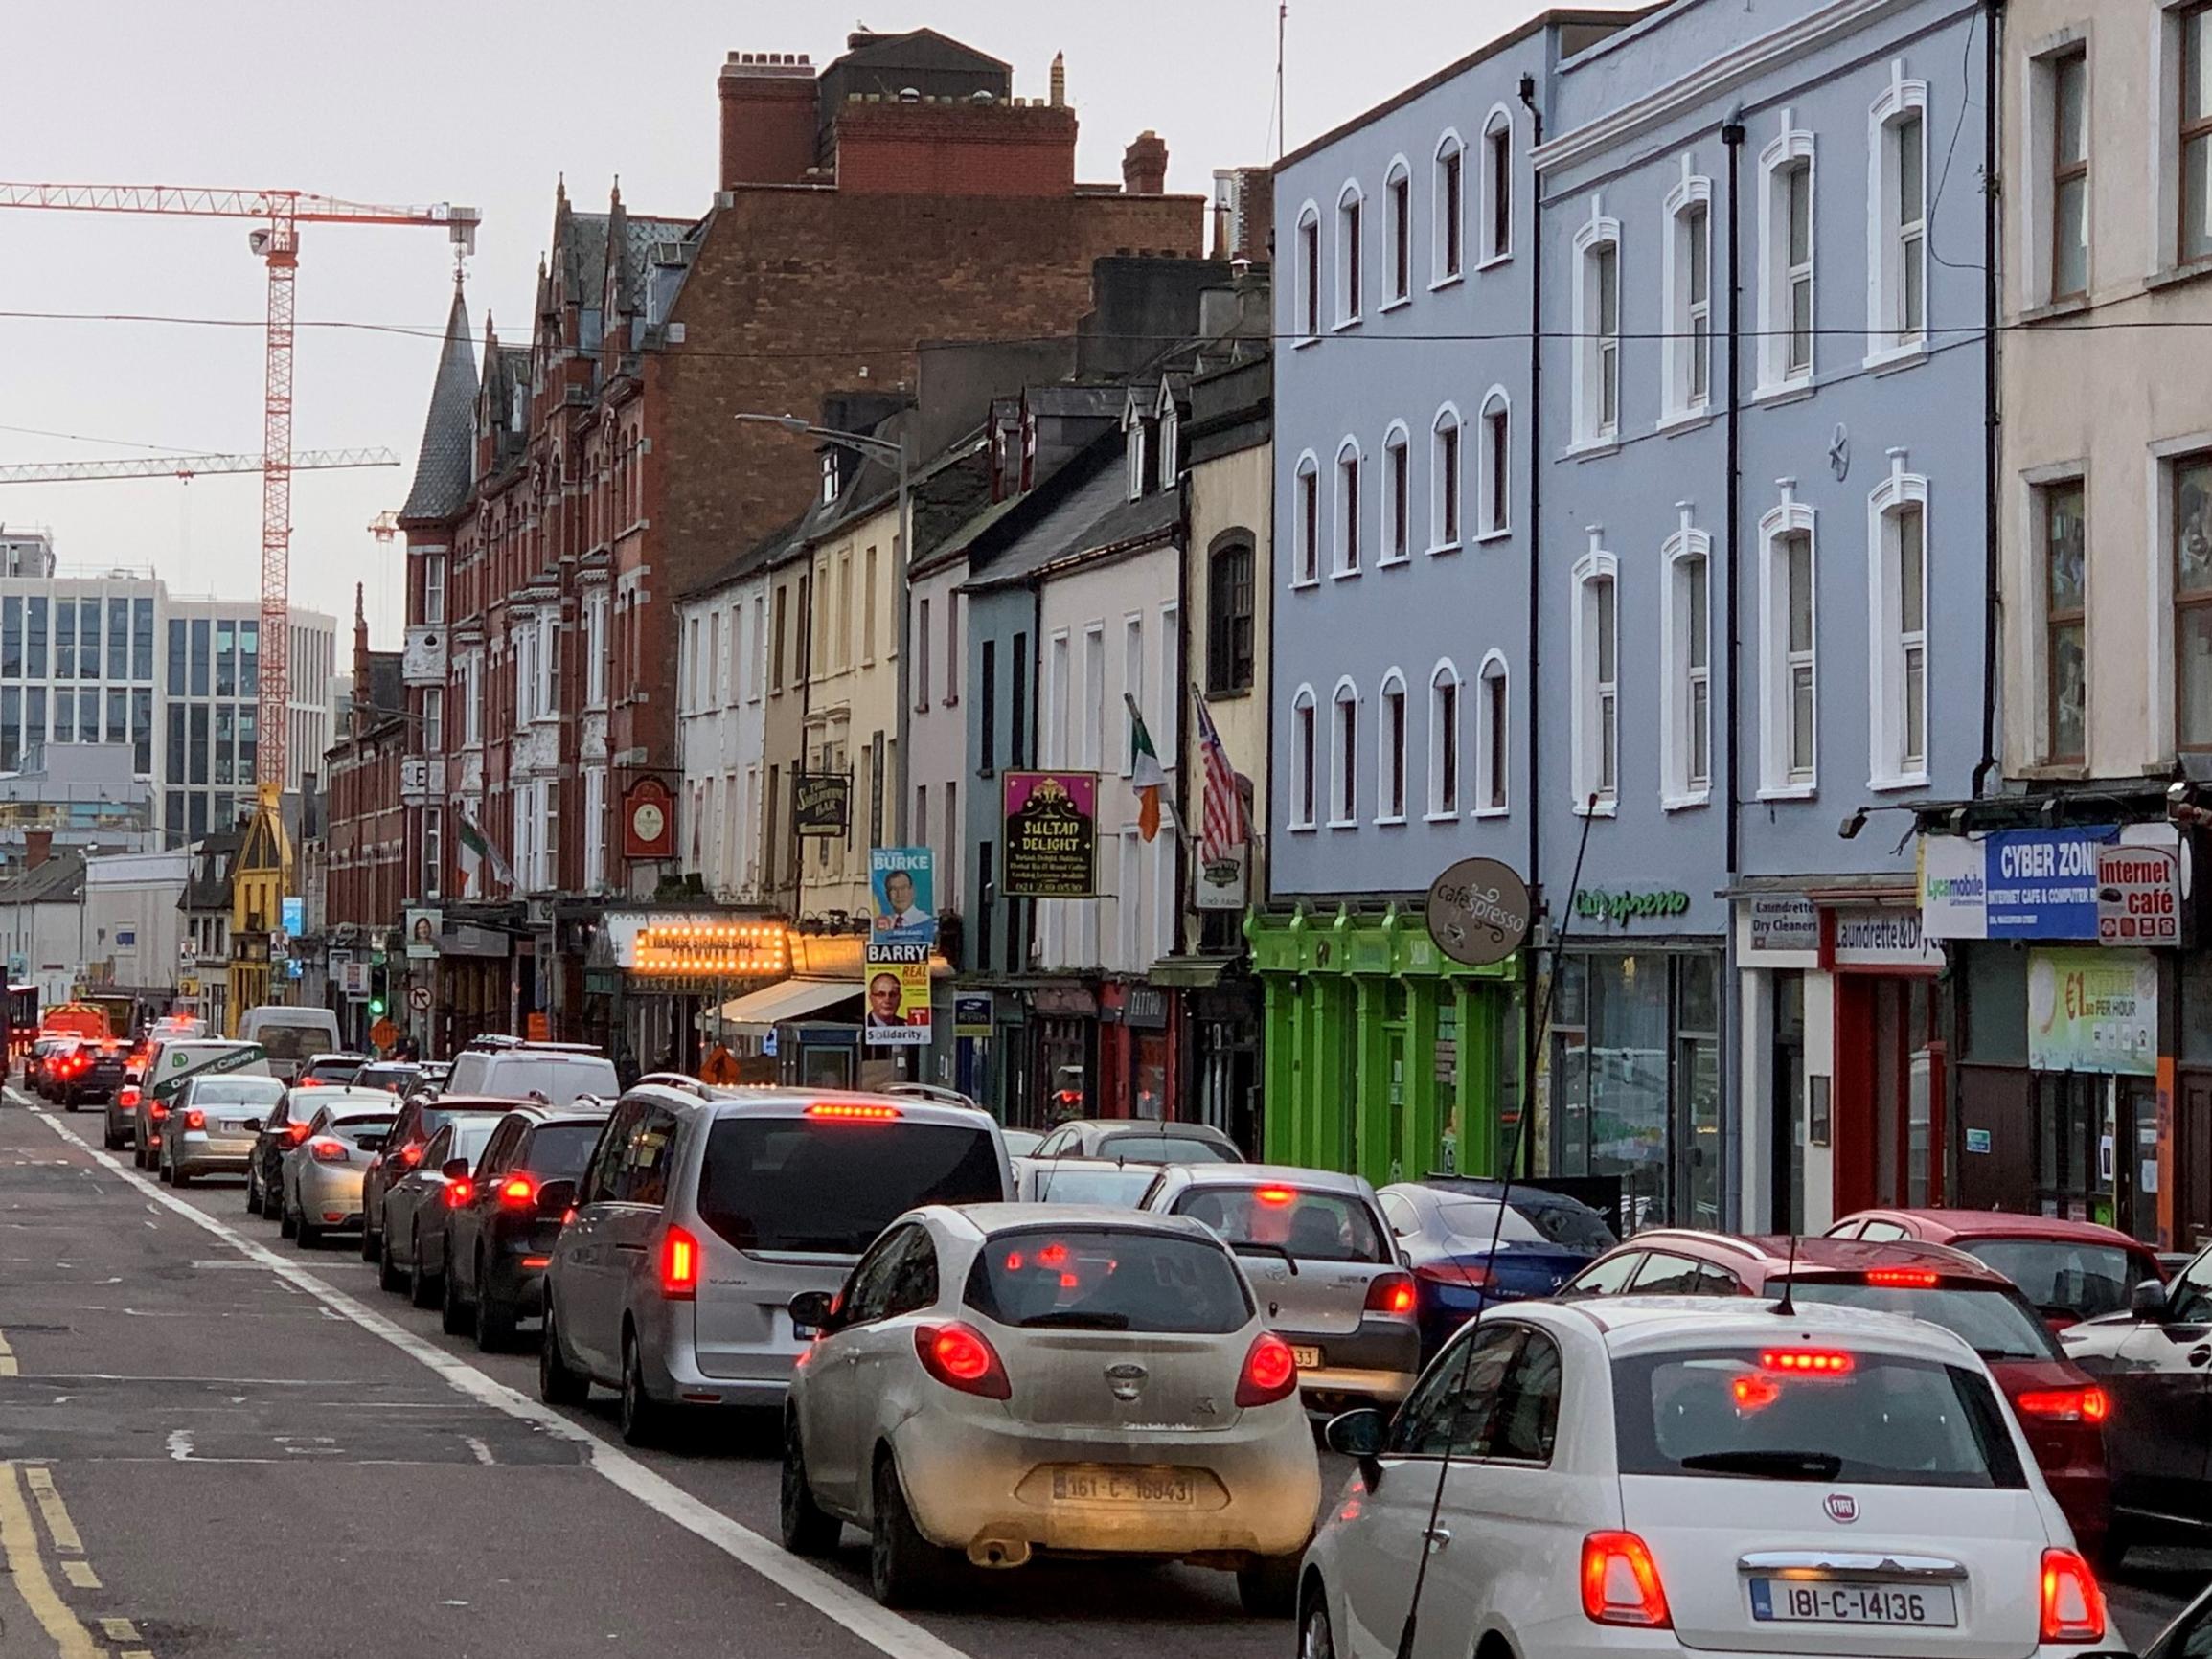 The bus lane may be empty for now, but this city needs less traffic, not a fourth lane of it